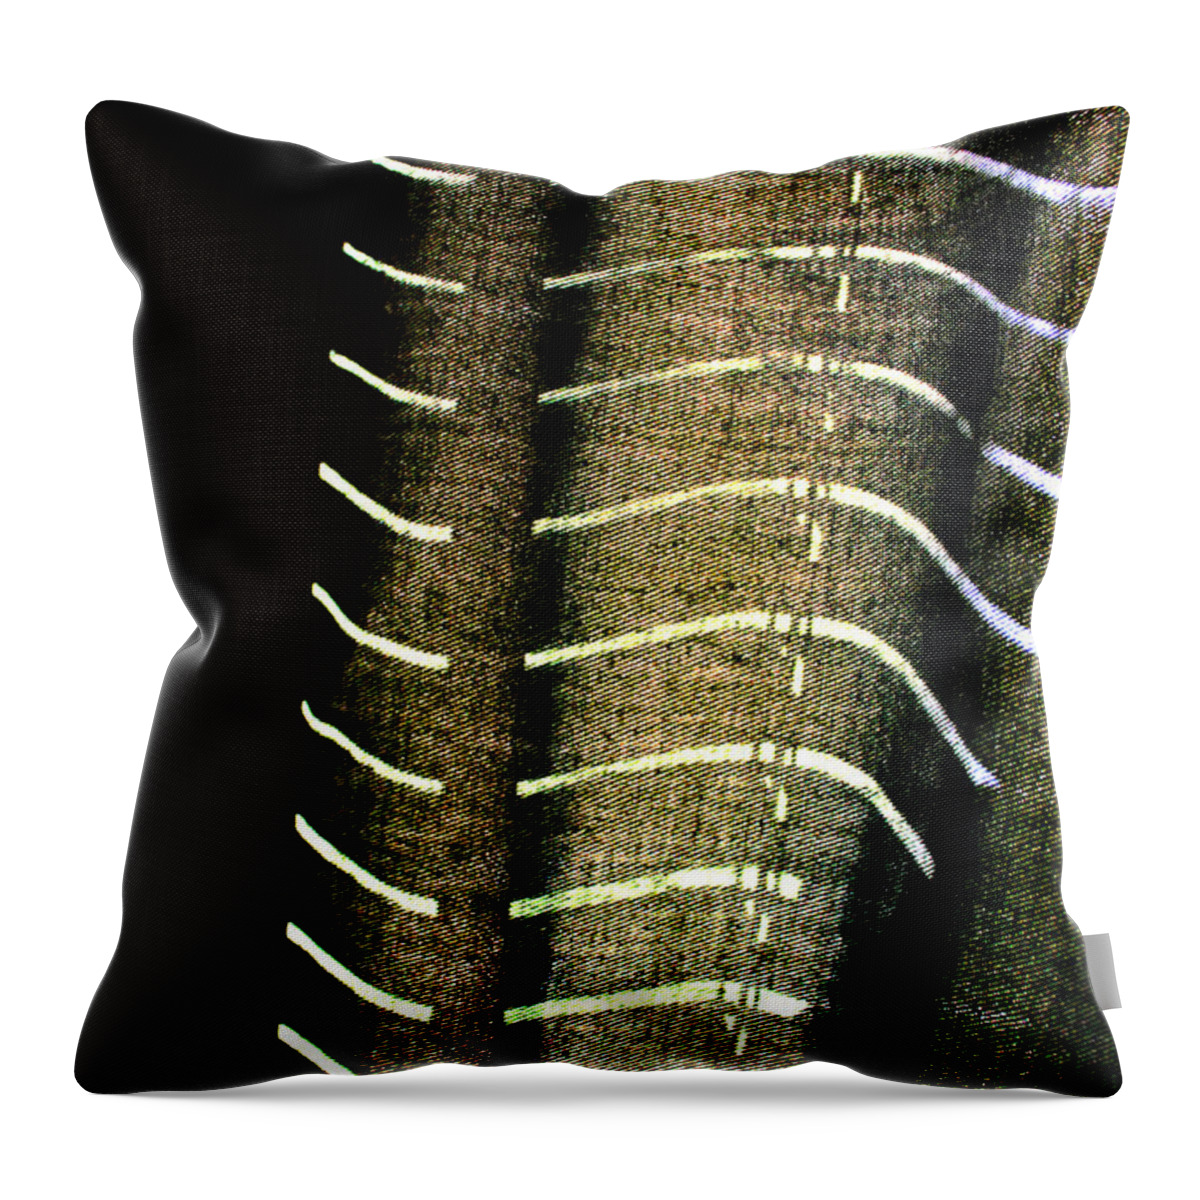 Abstract Throw Pillow featuring the photograph Curvilinear by Todd Blanchard